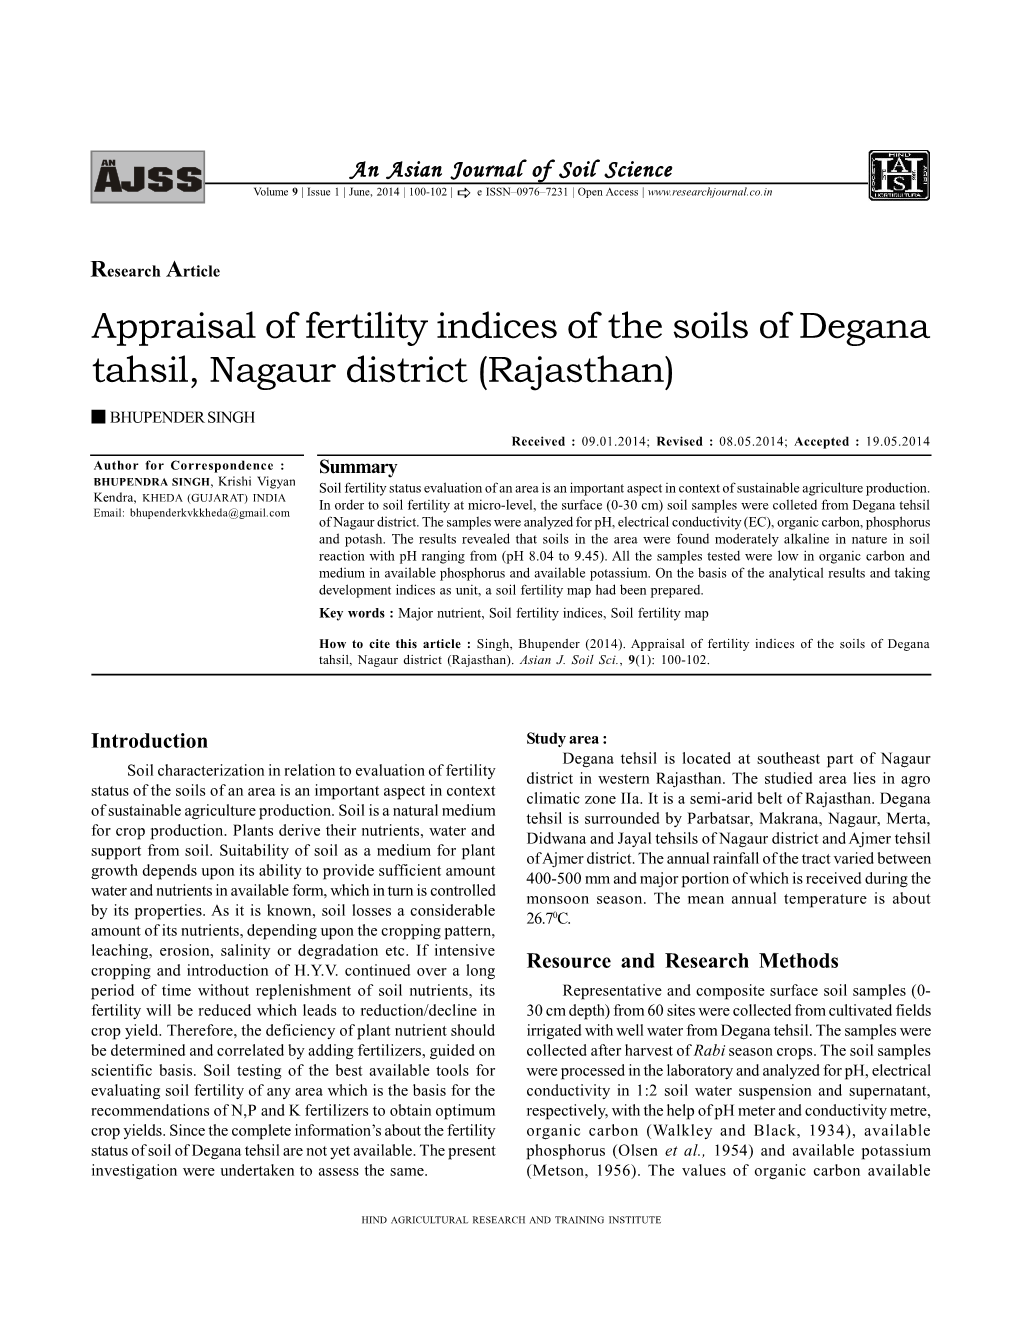 Appraisal of Fertility Indices of the Soils of Degana Tahsil, Nagaur District (Rajasthan)